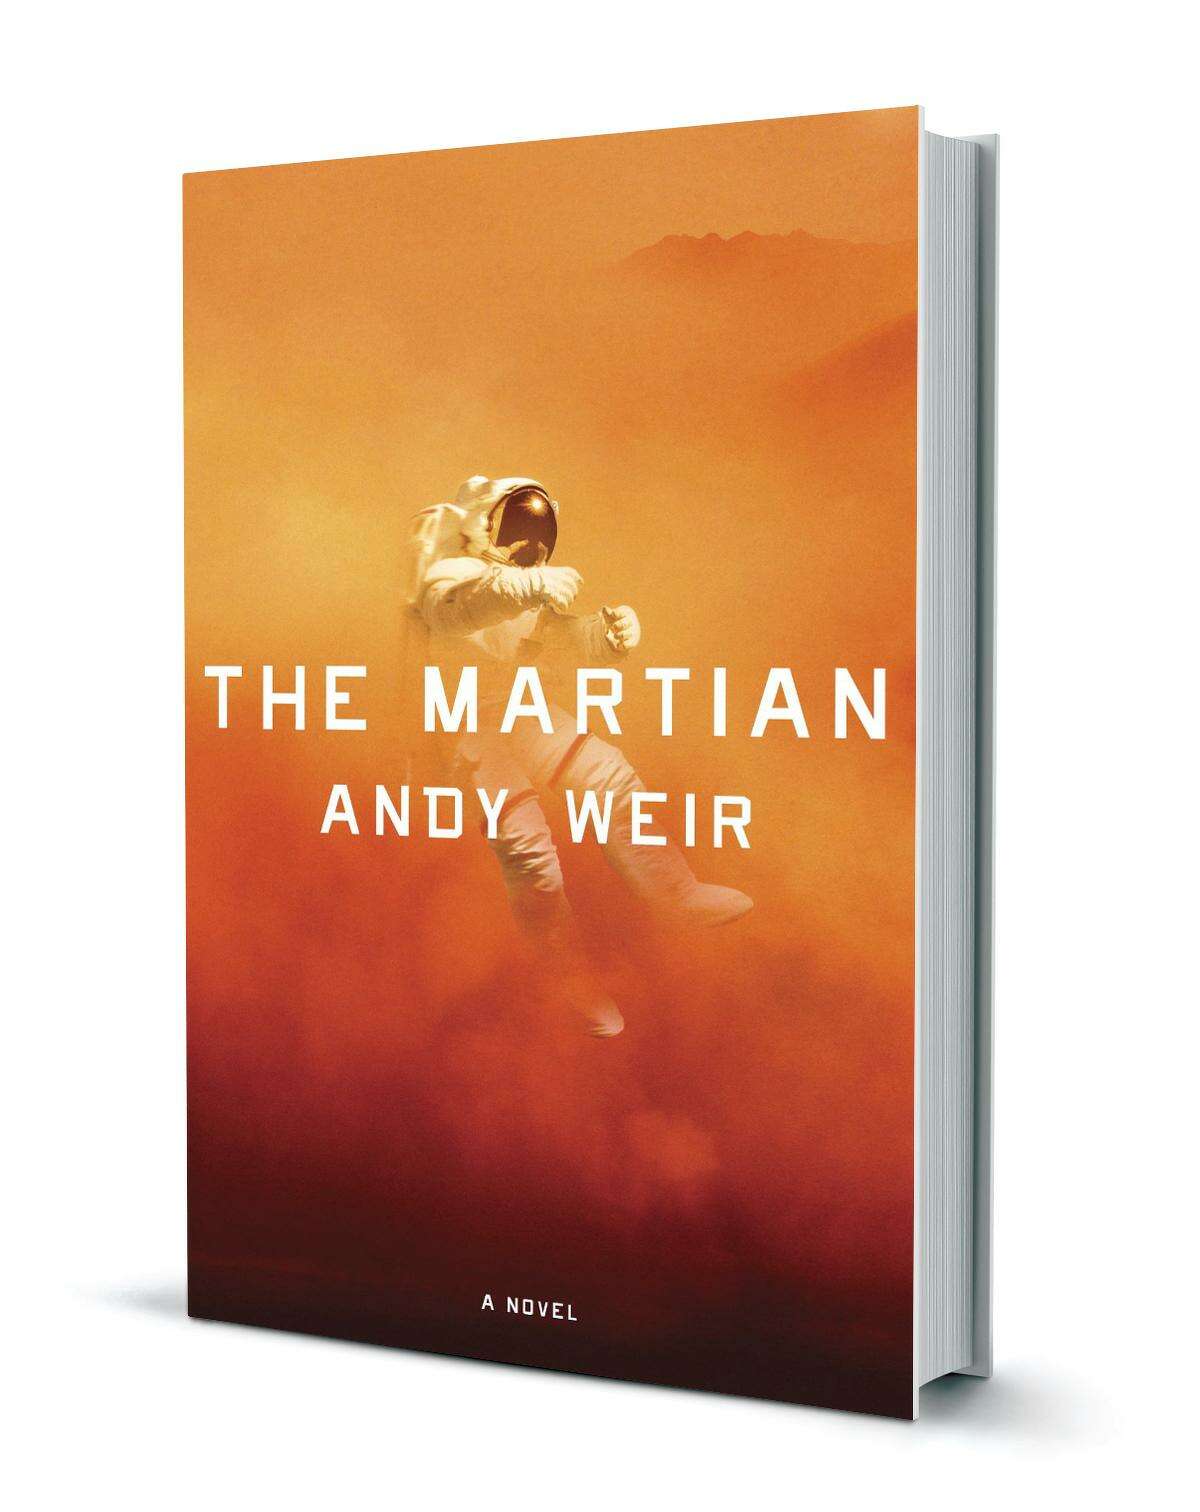 “The Martian,” by Andy Weir